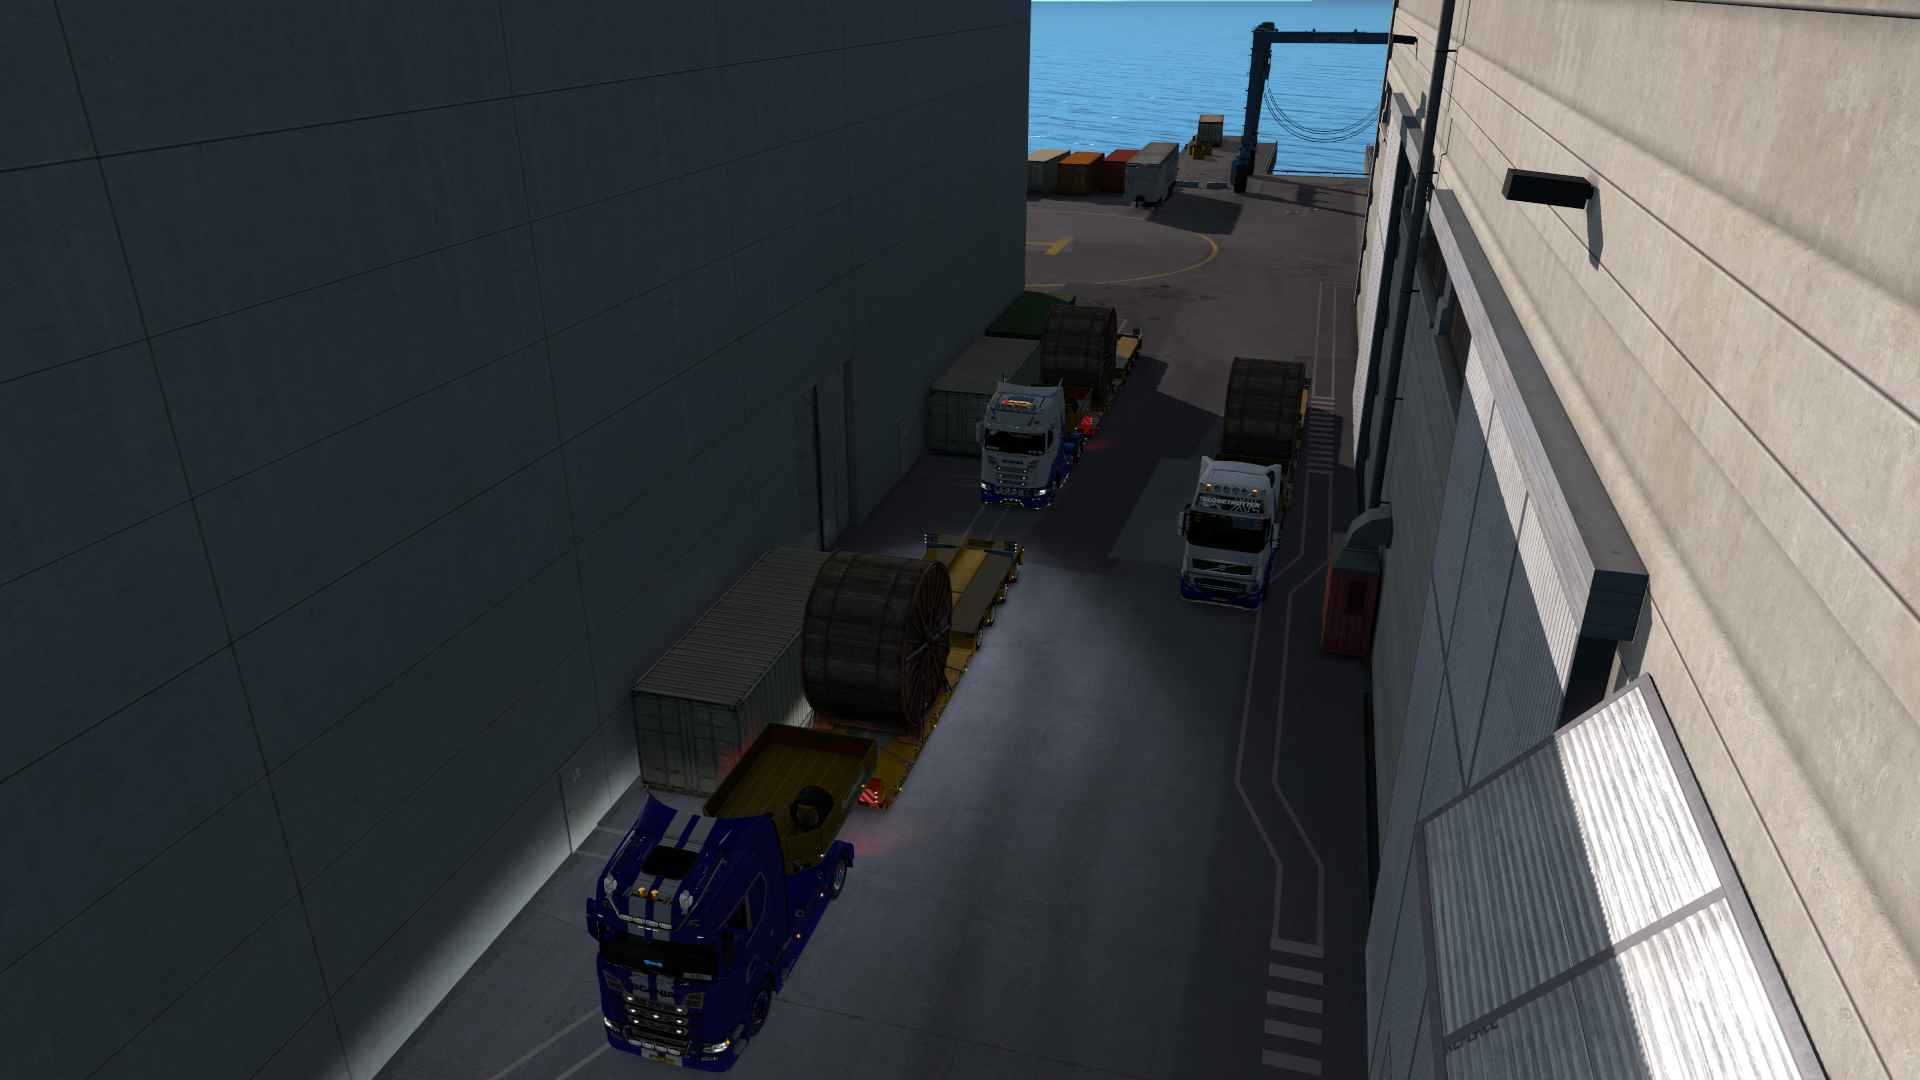 ets2_20200210_220501_00.png